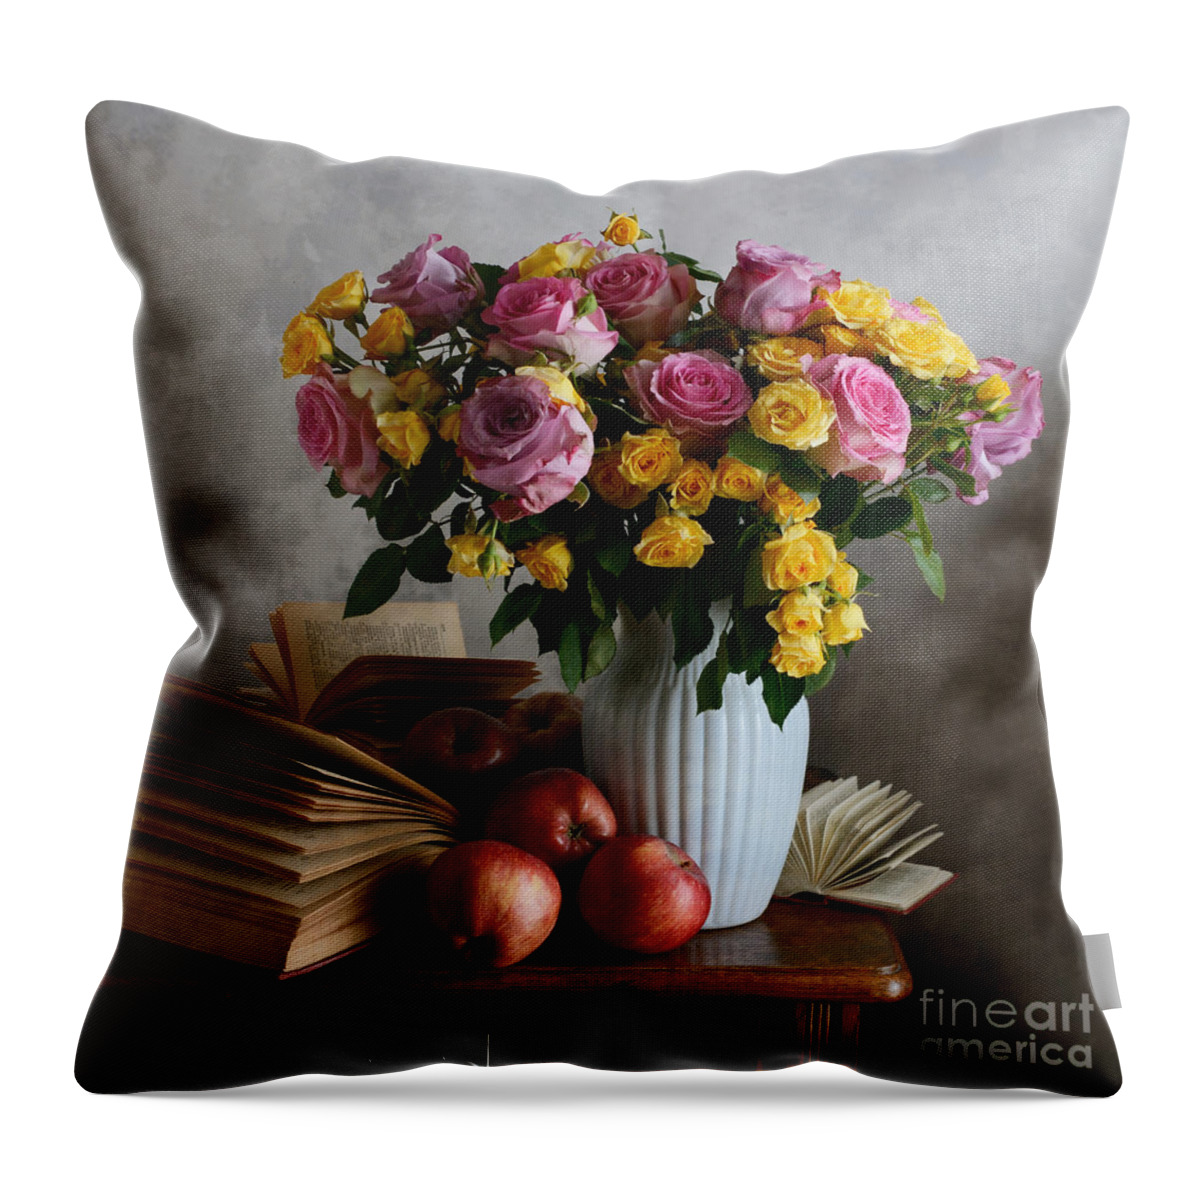 Vase Throw Pillow featuring the photograph Bouquet Of Flowers In White Vase by Nikolay Panov